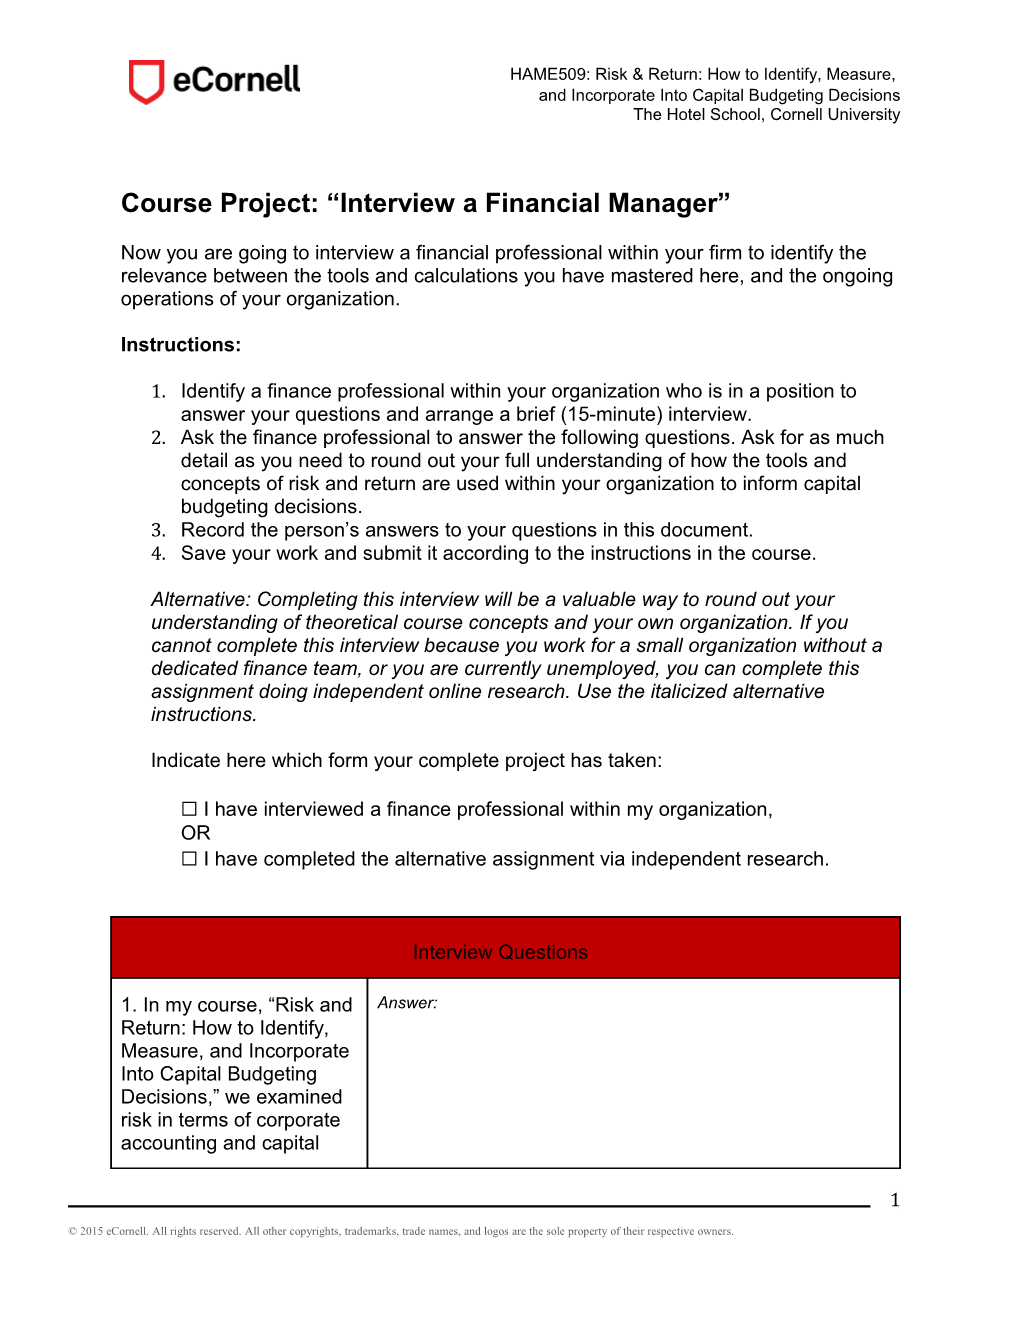 Course Project: Interview a Financial Manager